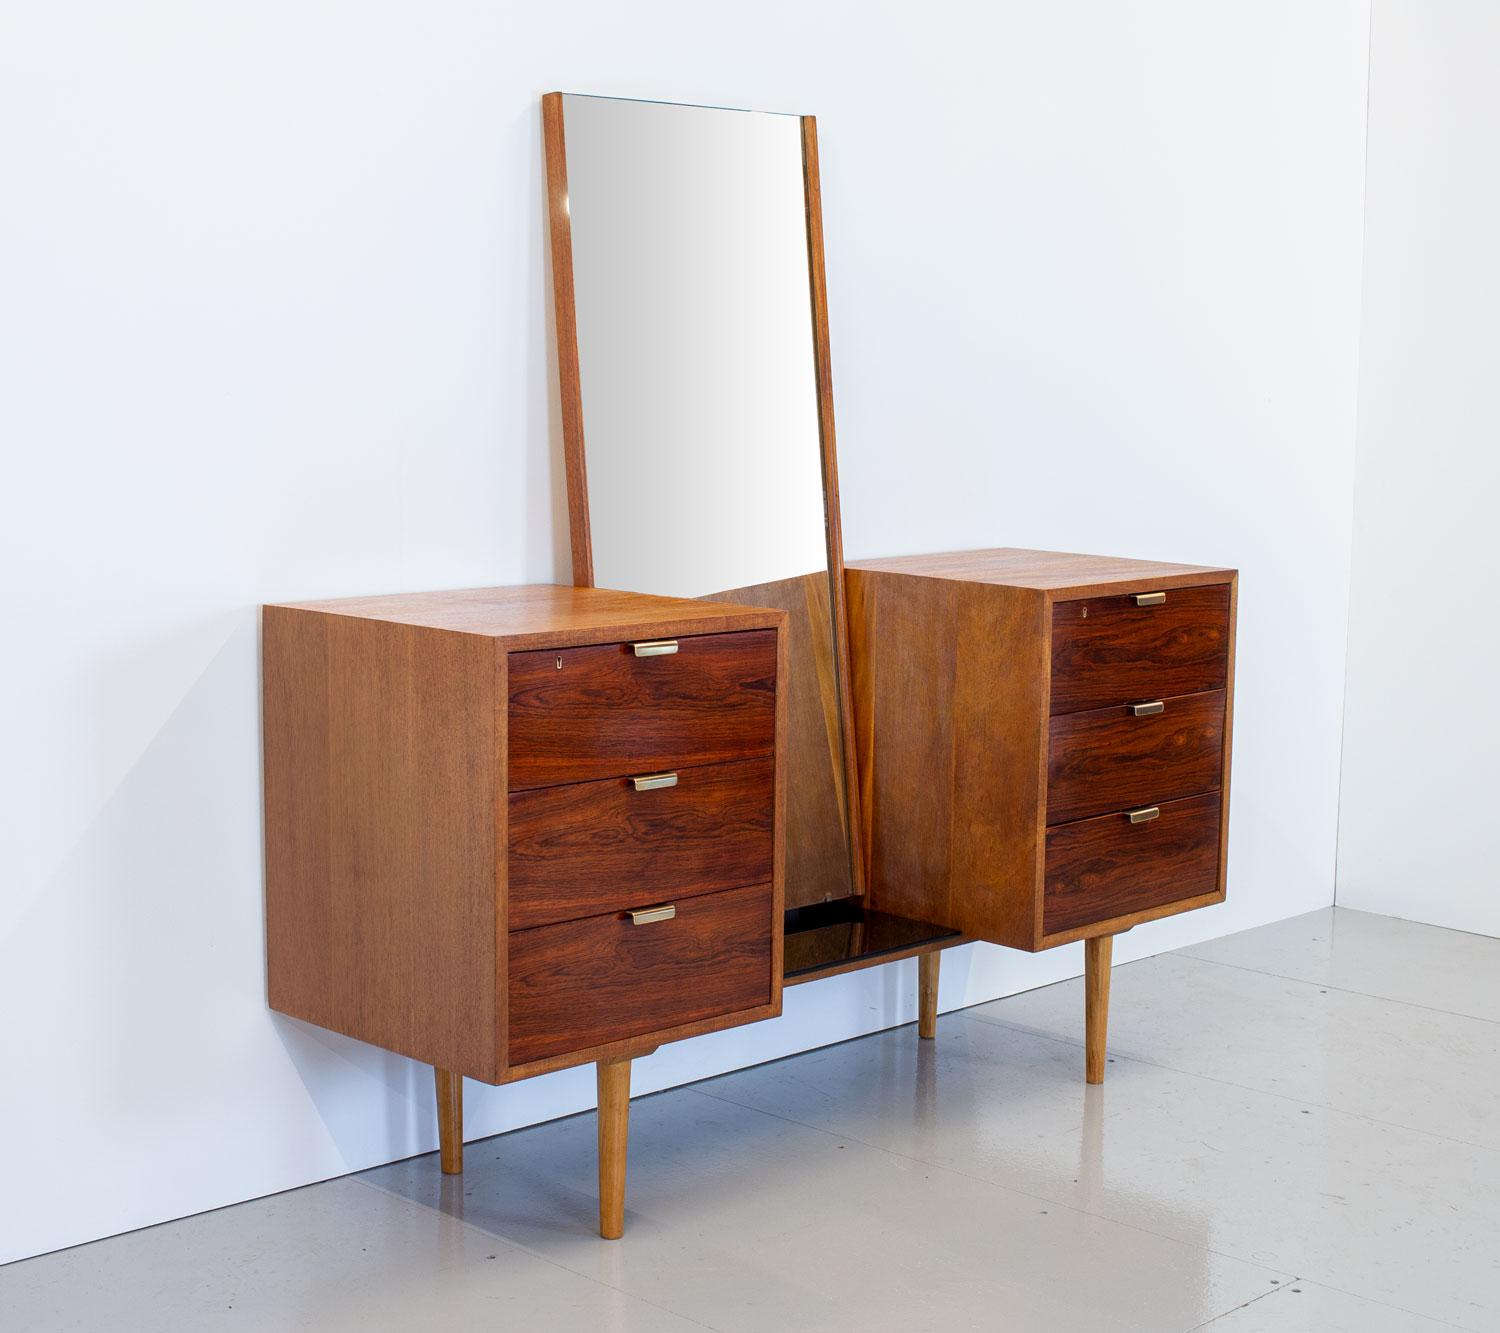 A rare Interplan dressing table designed by iconic British designer Robin Day for Hille in 1954. It has a mahogany frame, rosewood drawers with brass handles, turned beech legs and a full length mirror with black Vitrolite glass shelf below.